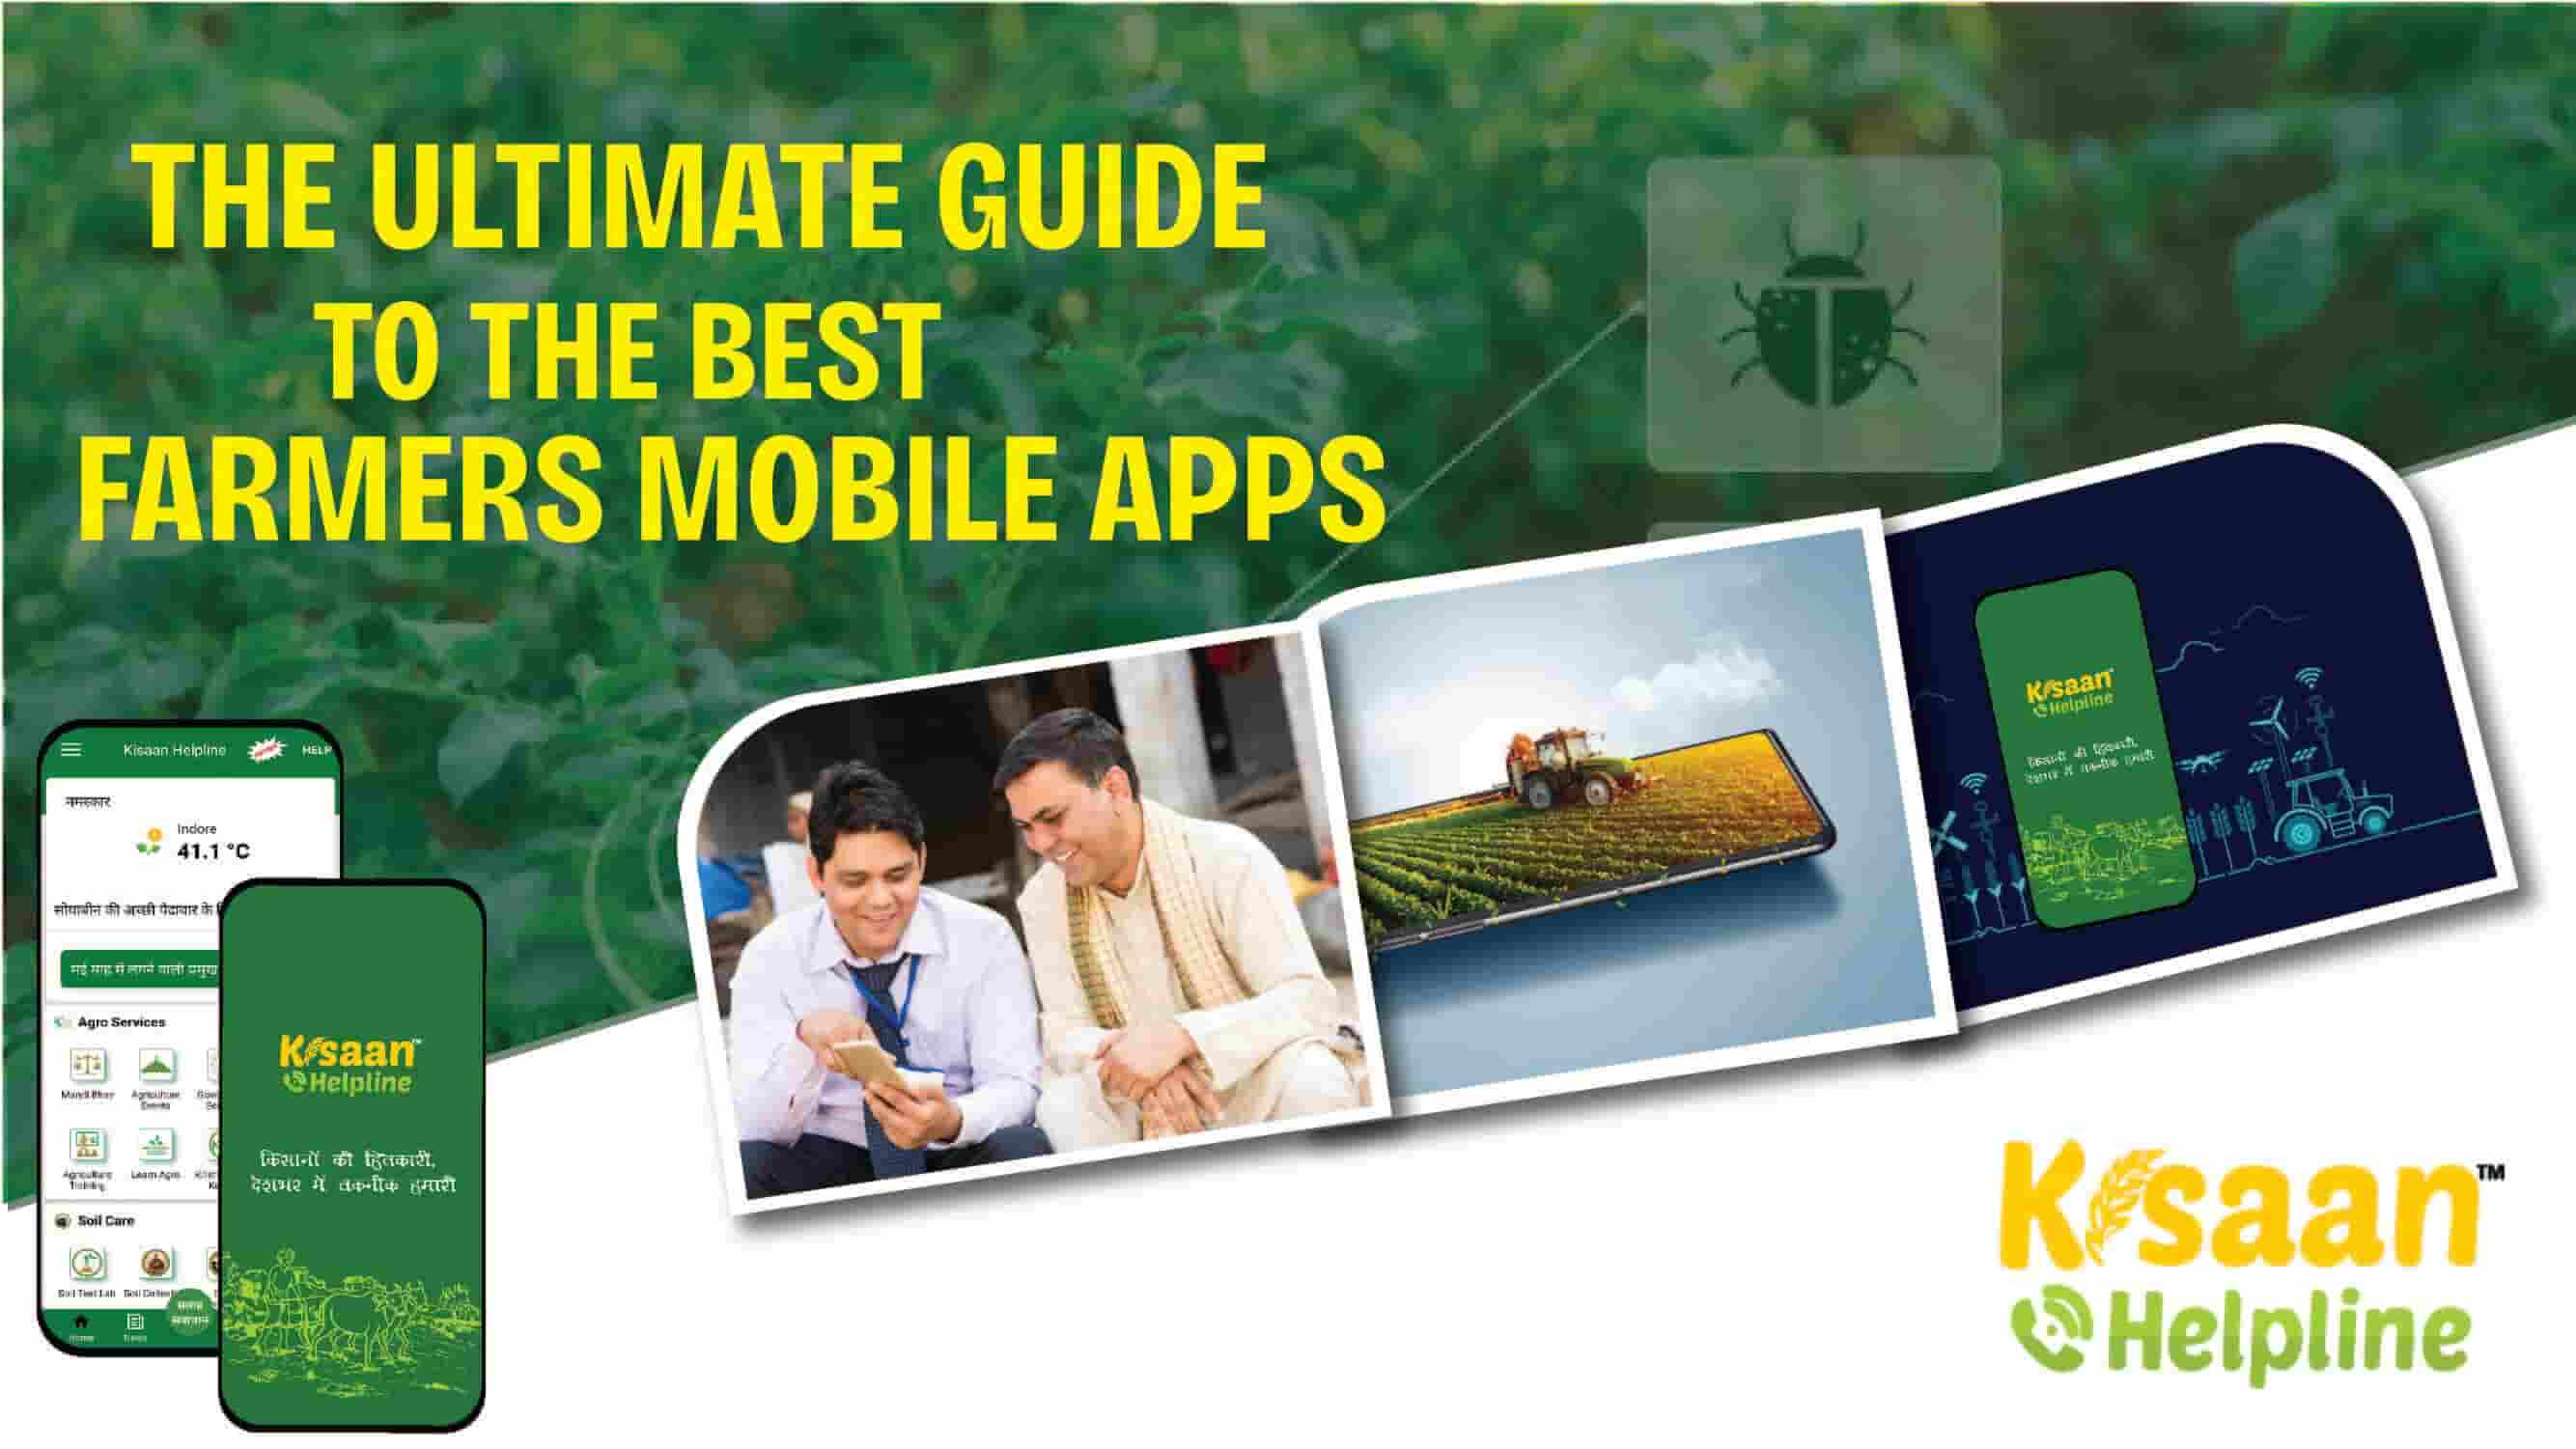 The Ultimate Guide to the Best Farmers Mobile Apps